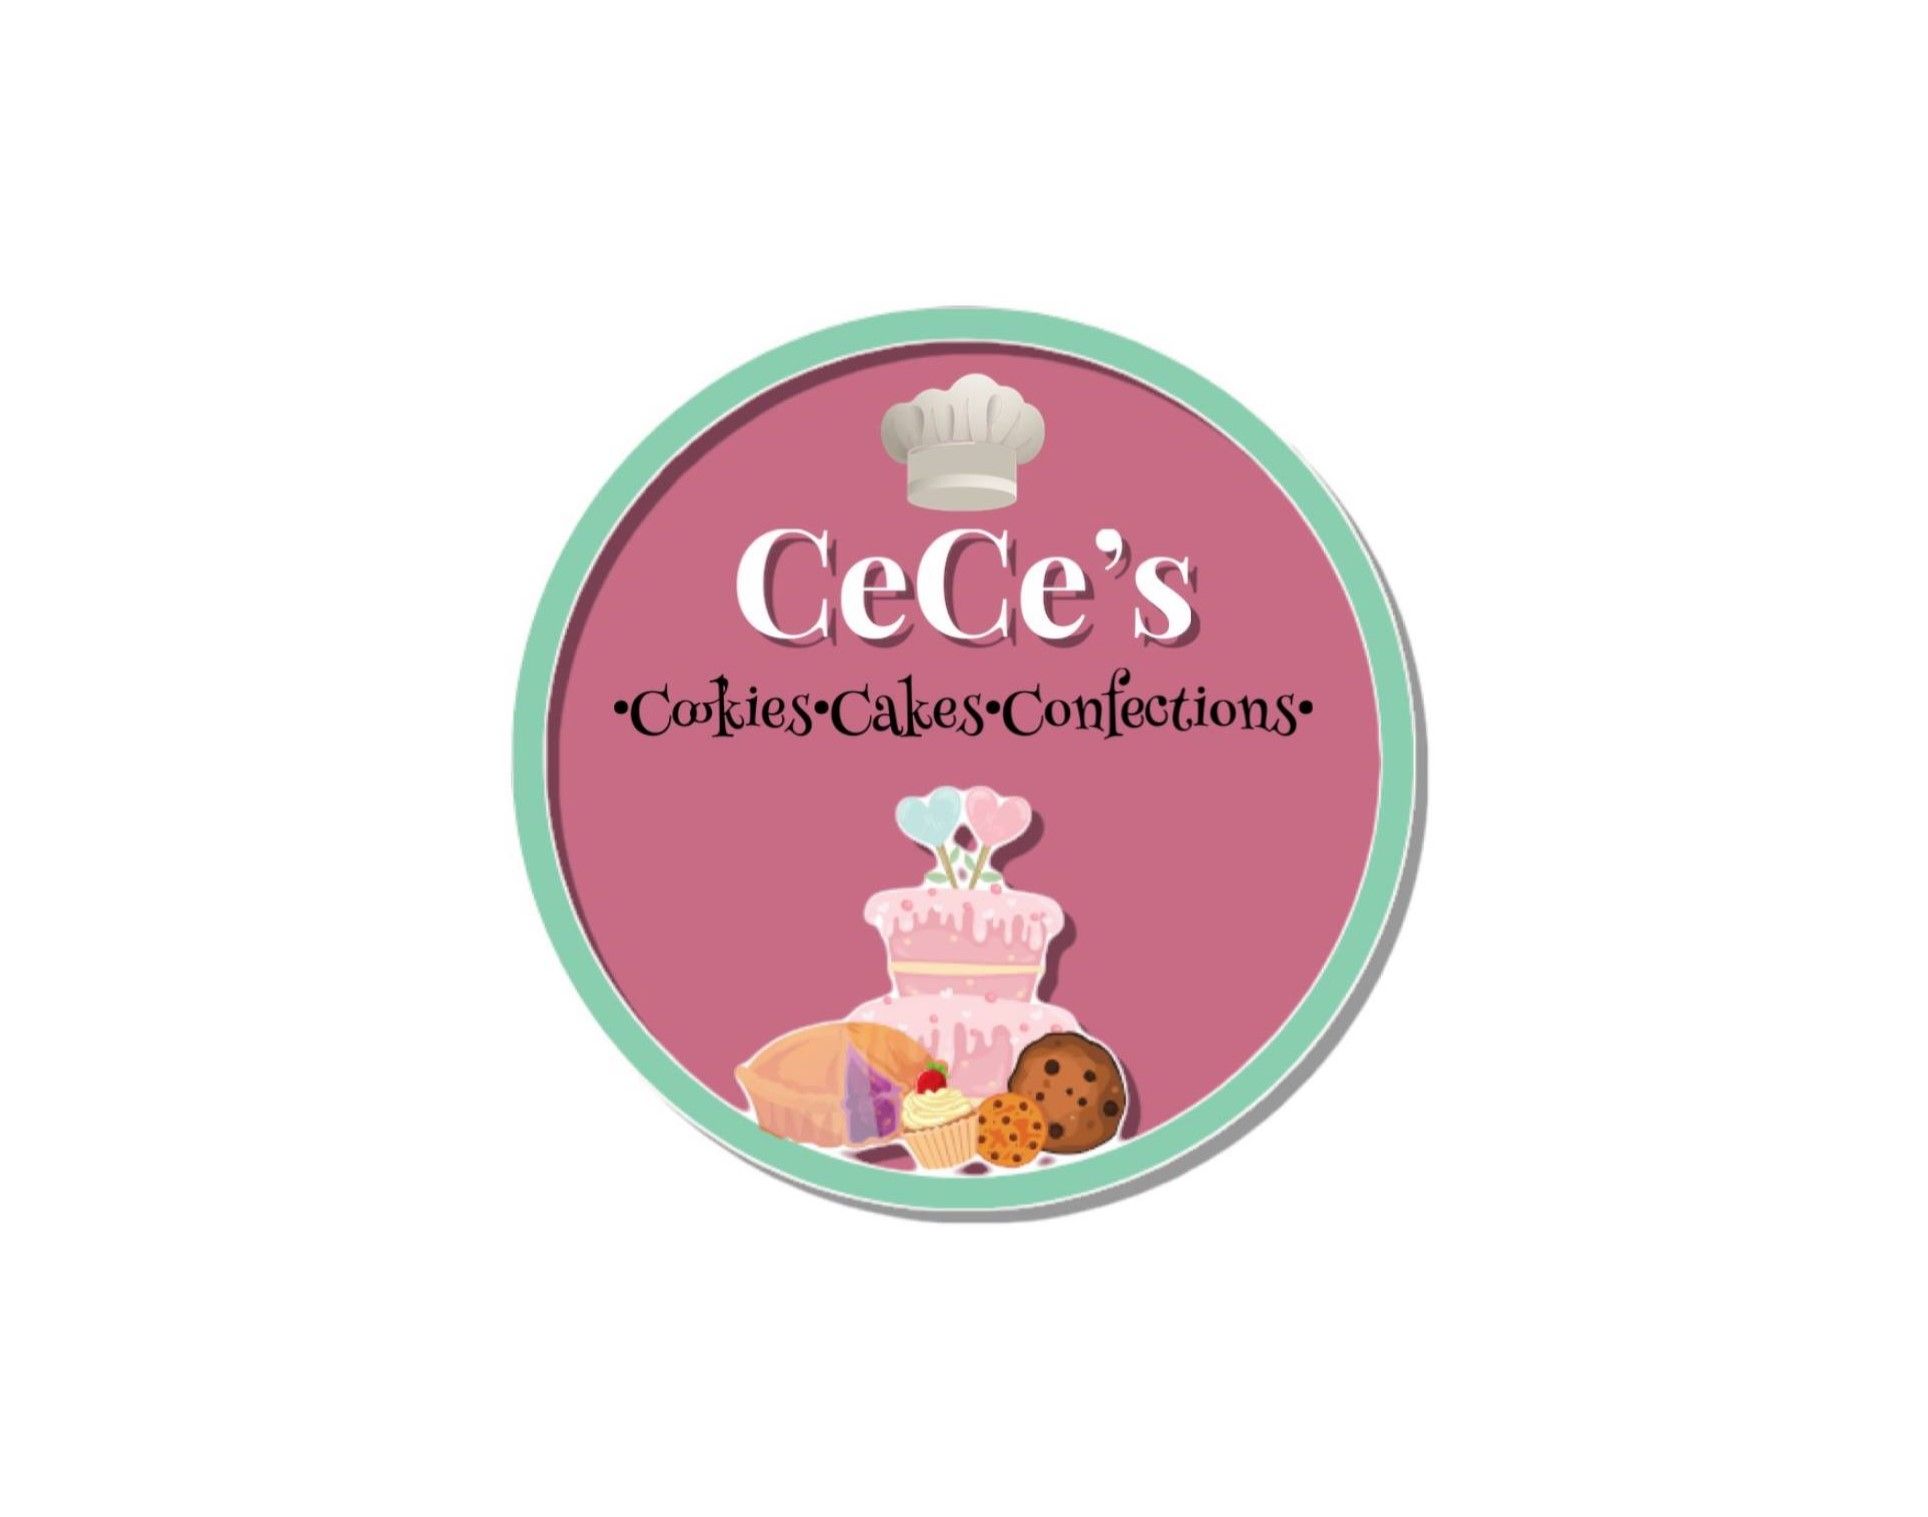 Made With Love - CeCe's Cookies, Cakes & Confections